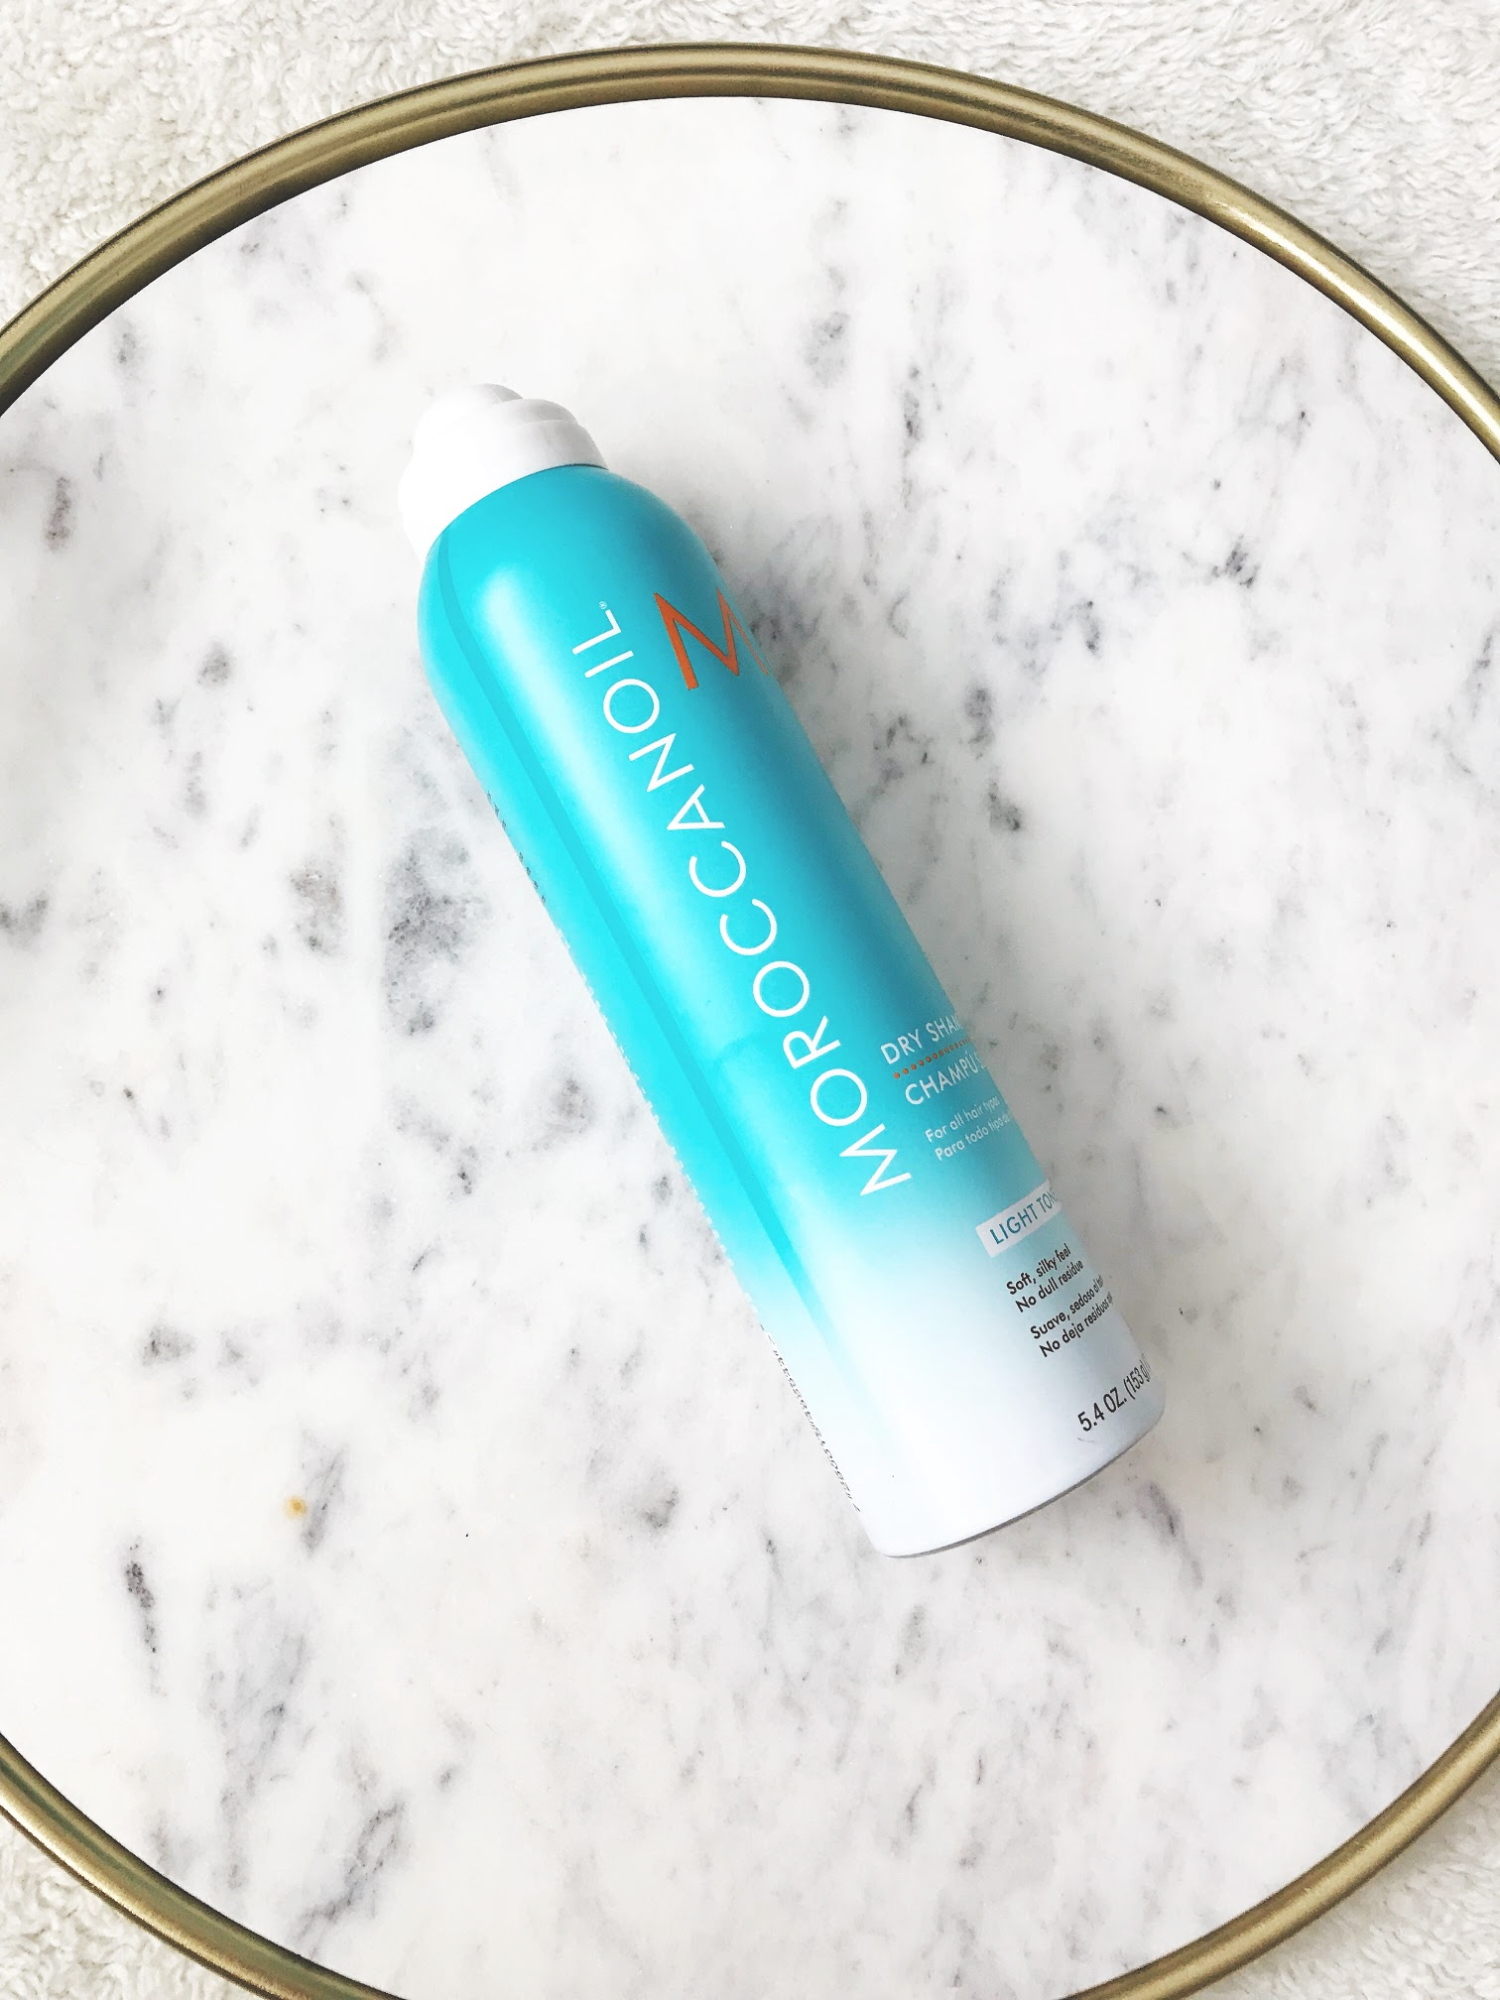 STH 6 Beauty Products I'm Currently Loving-Moroccanoil Dry Shampoo